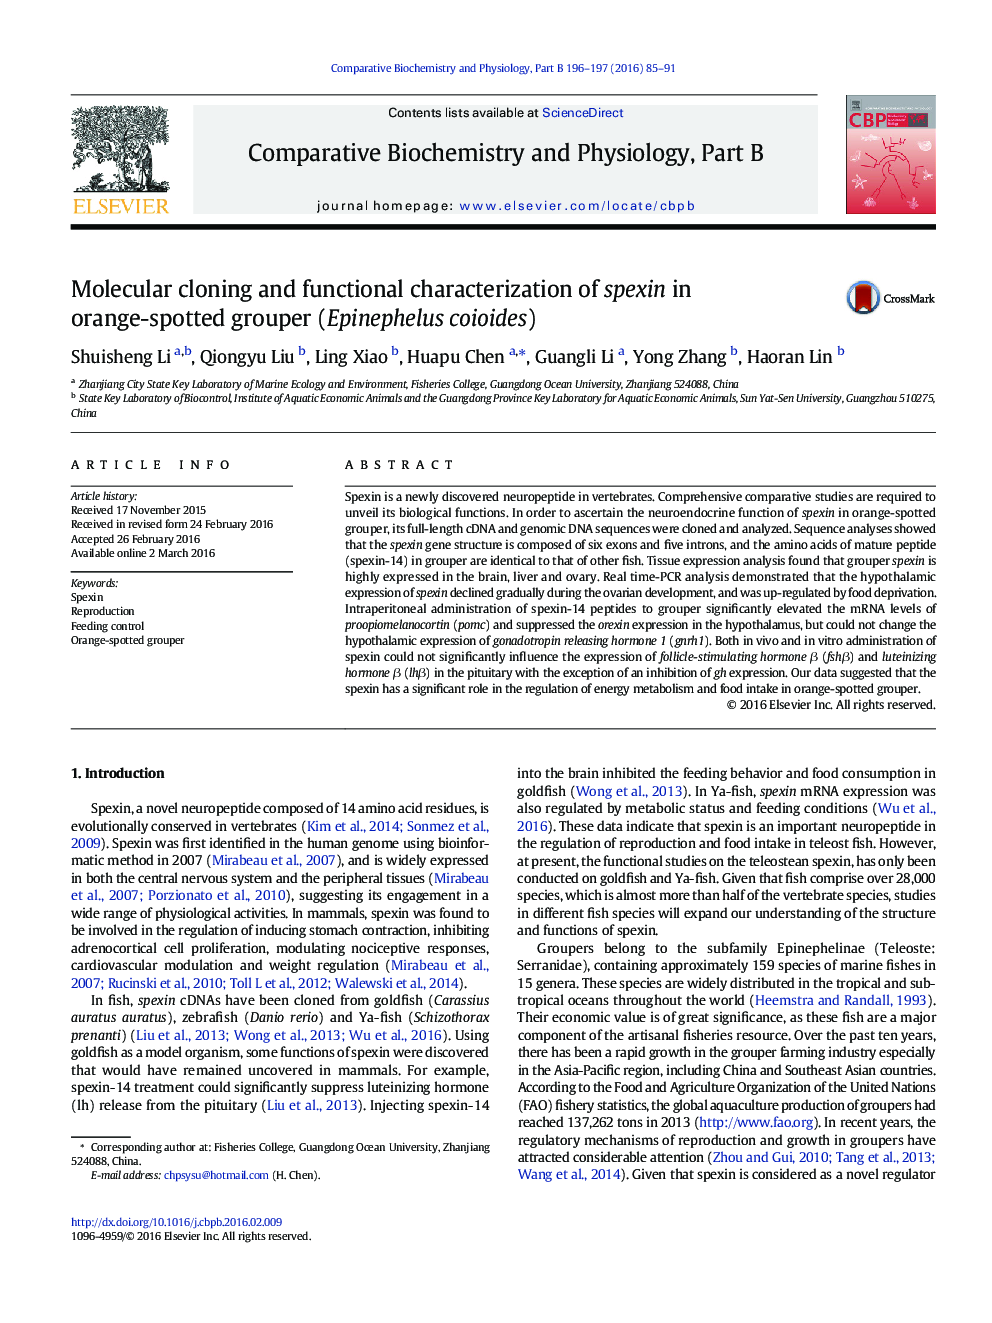 Molecular cloning and functional characterization of spexin in orange-spotted grouper (Epinephelus coioides)